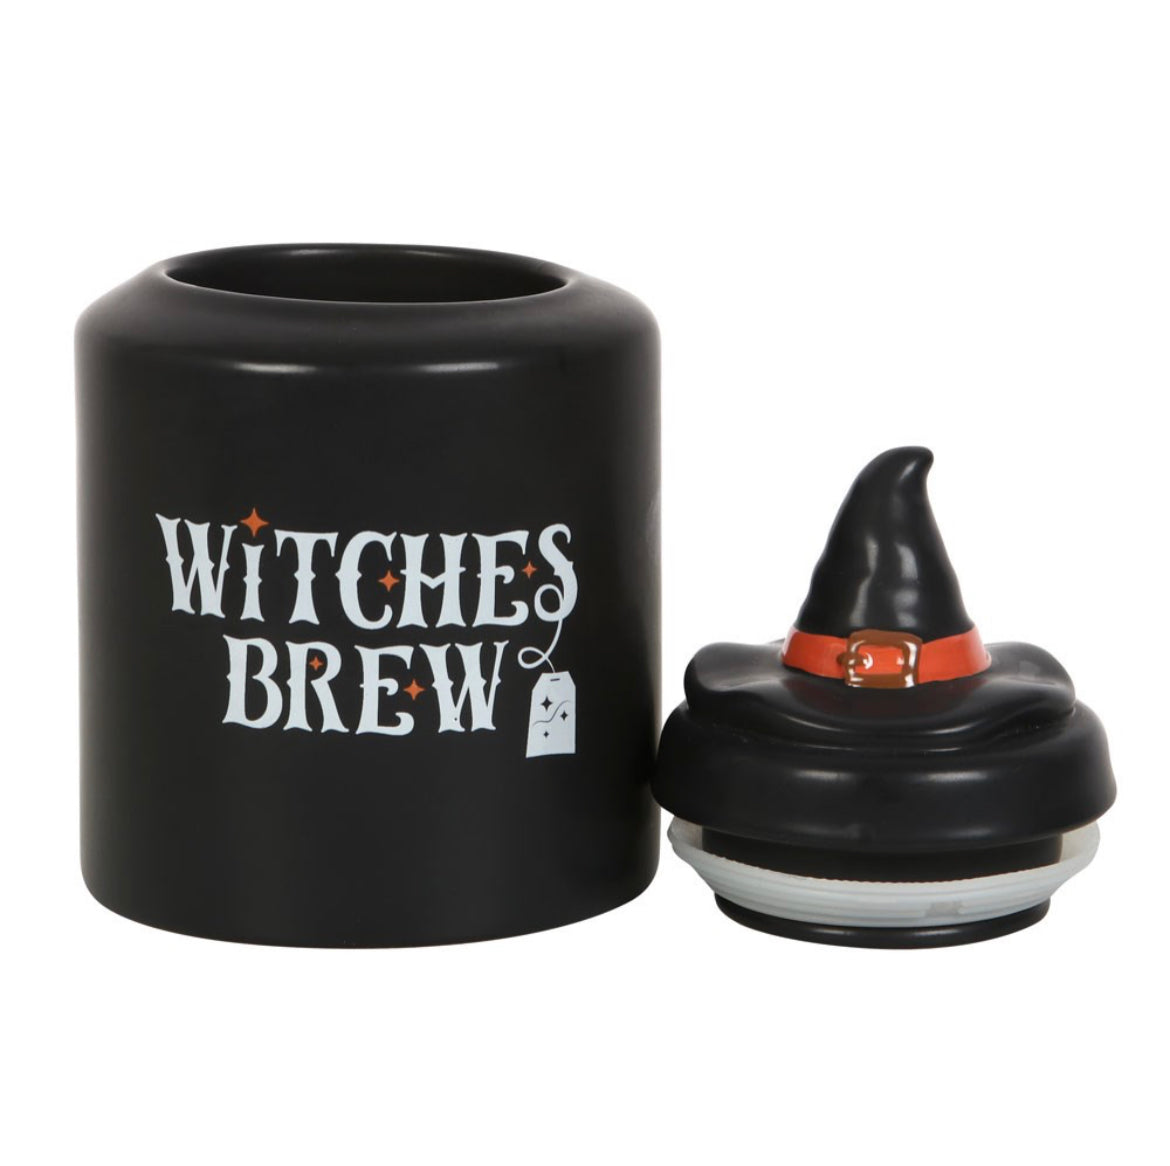 Witches Brew Ceramic Tea Canister - Wicked Witcheries